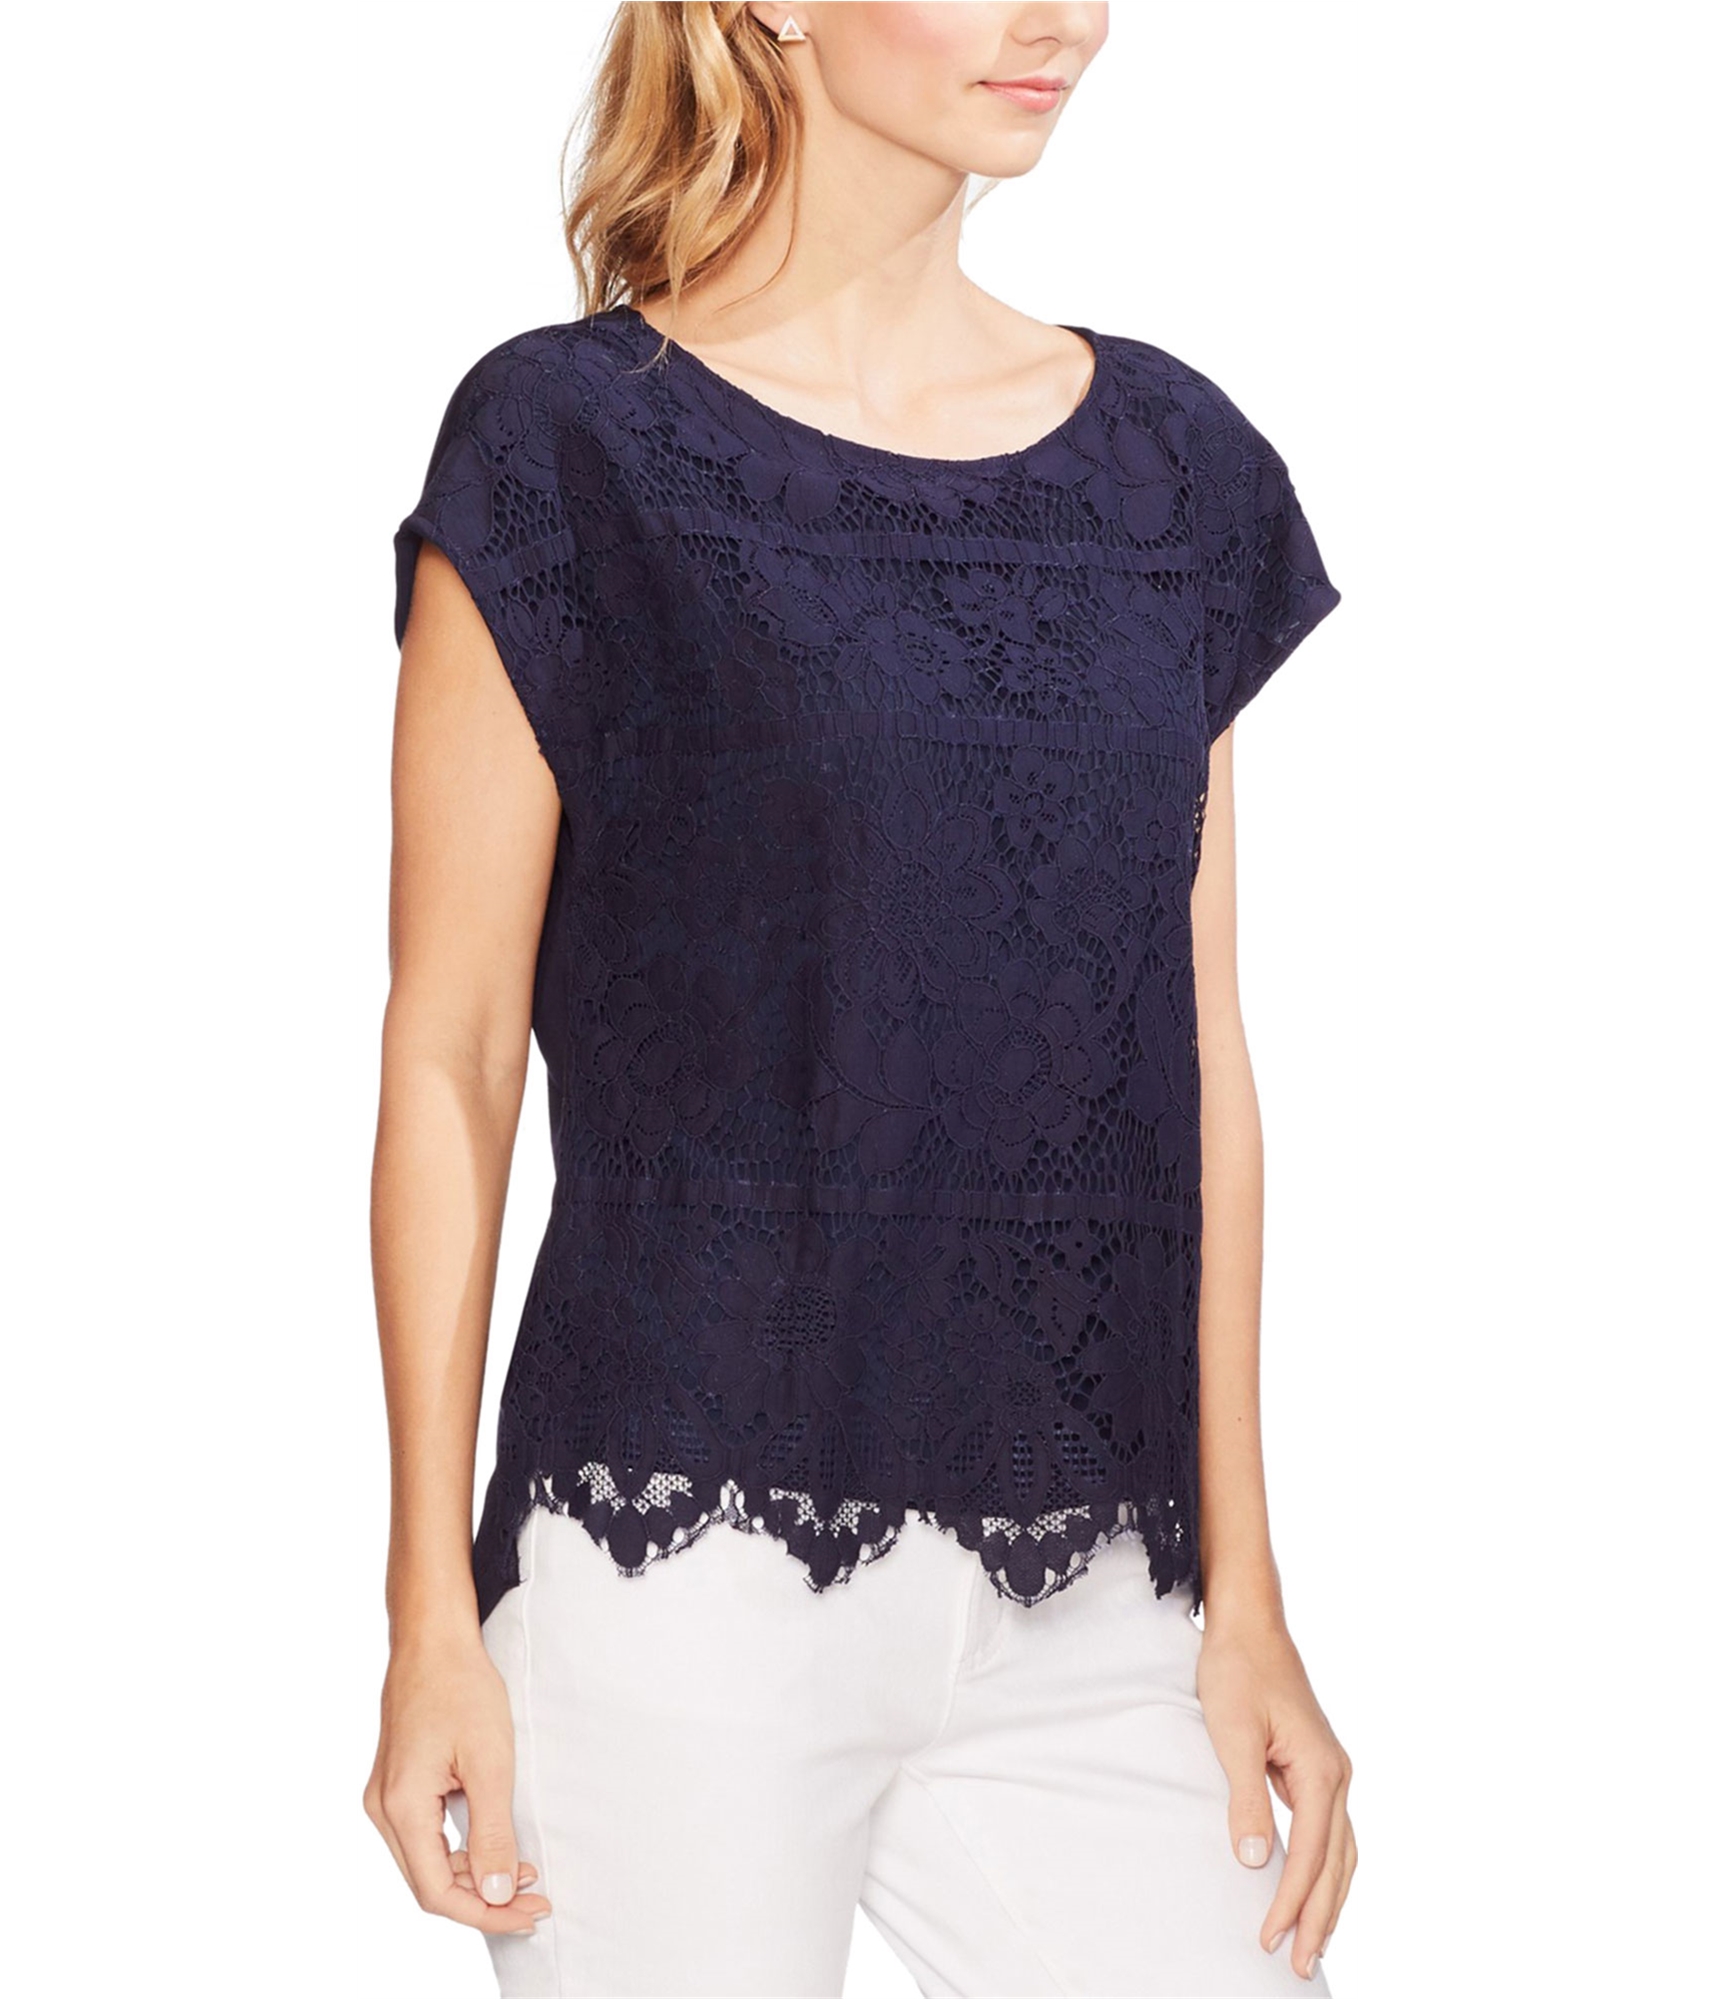 woman-wearing-lace-overlay-top